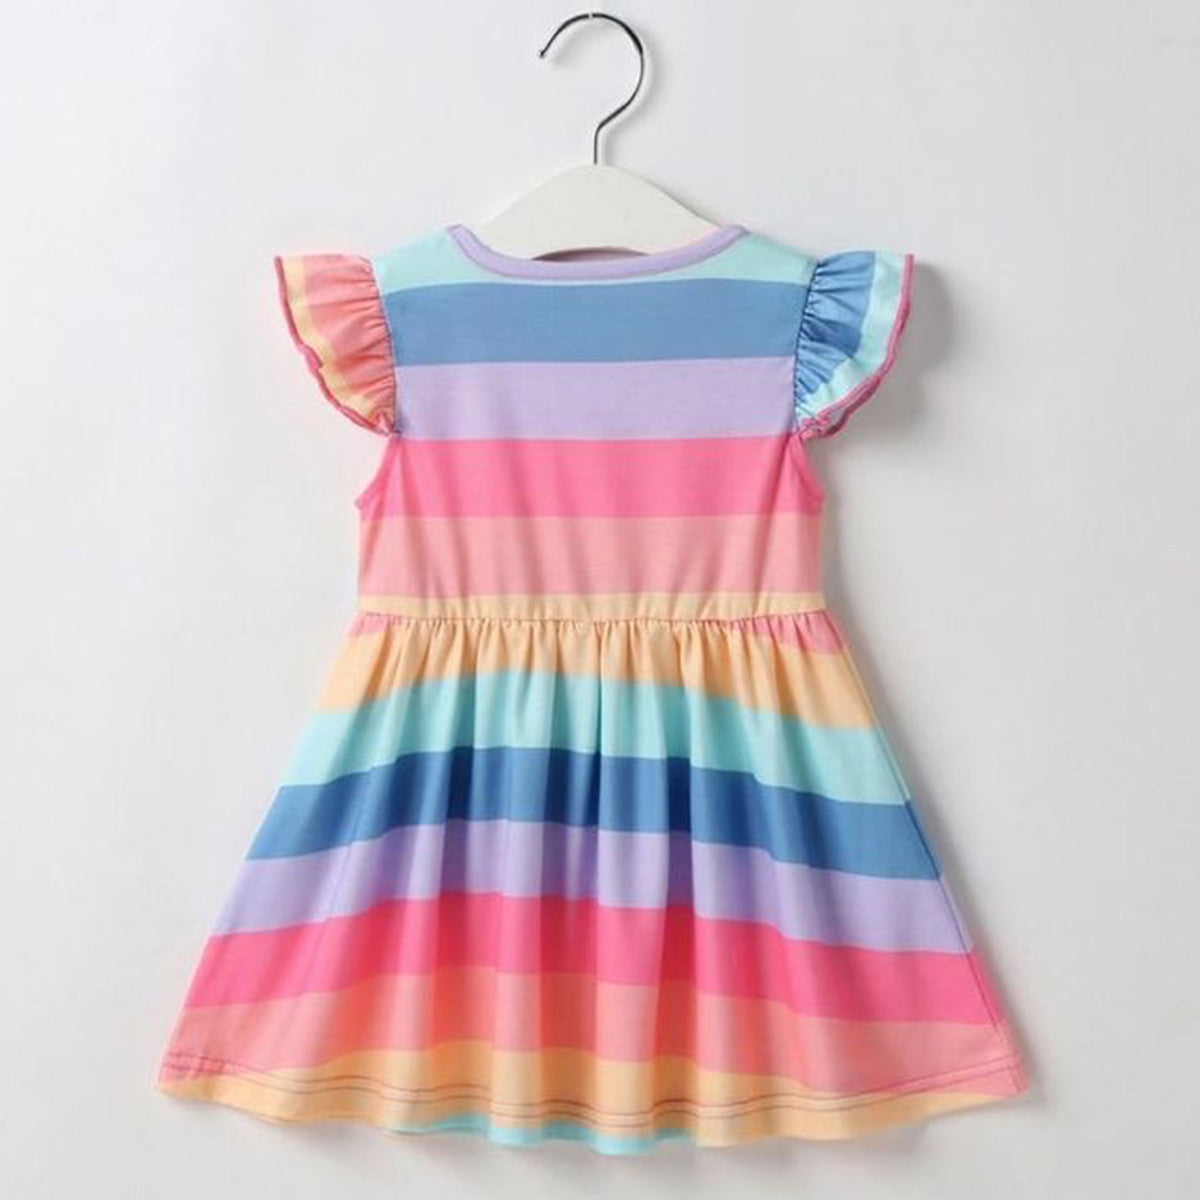 BabyGirl Princess Multi Lining & Sun Floewer Tunic Dress (Combo Pack Of 2) for Baby Girls.